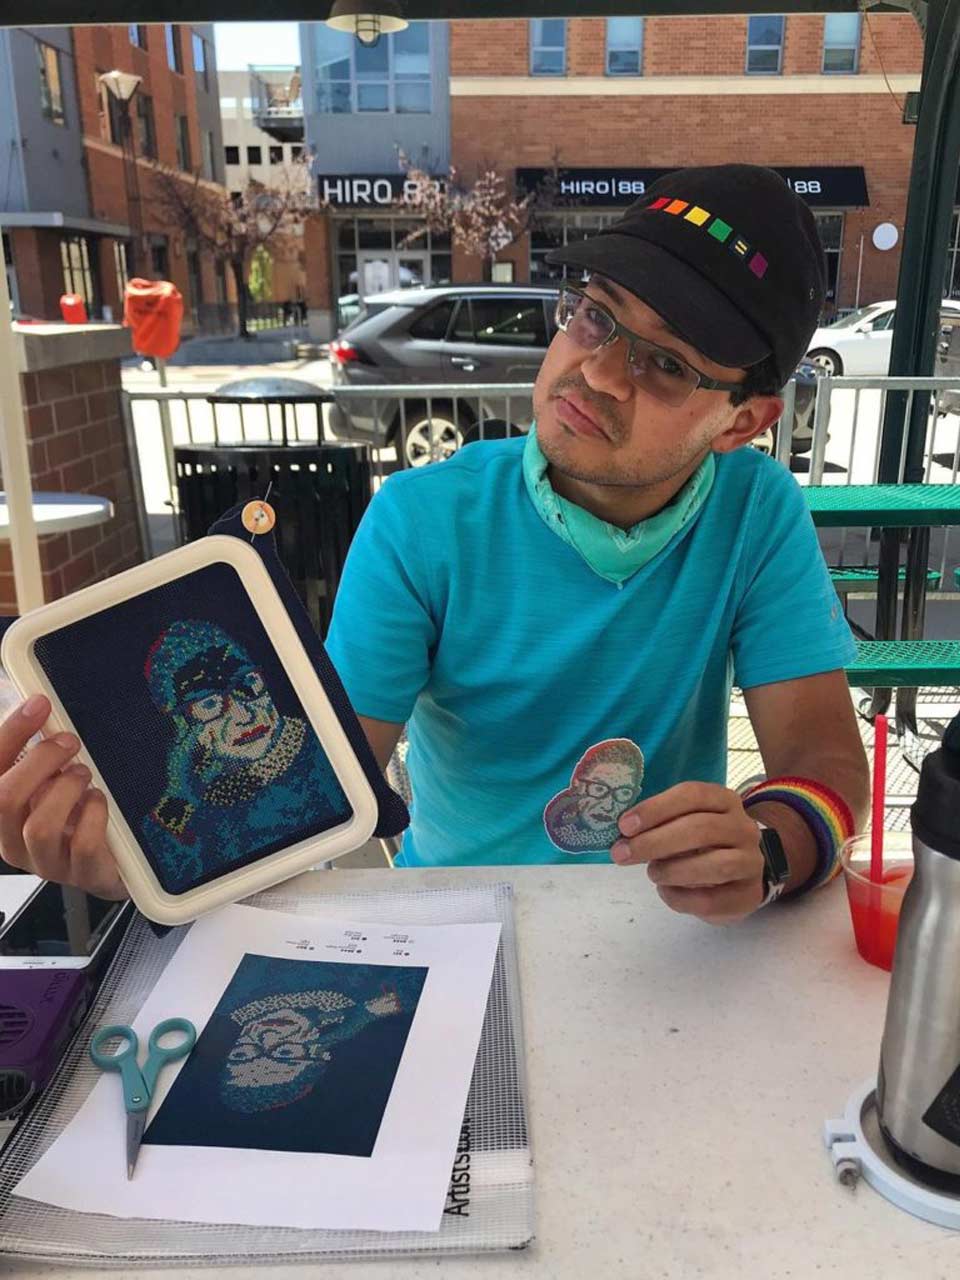 Justin Gibson holds an in-progress “RBG in RGB” cross stitch at a makers market in Lincoln, Nebraska